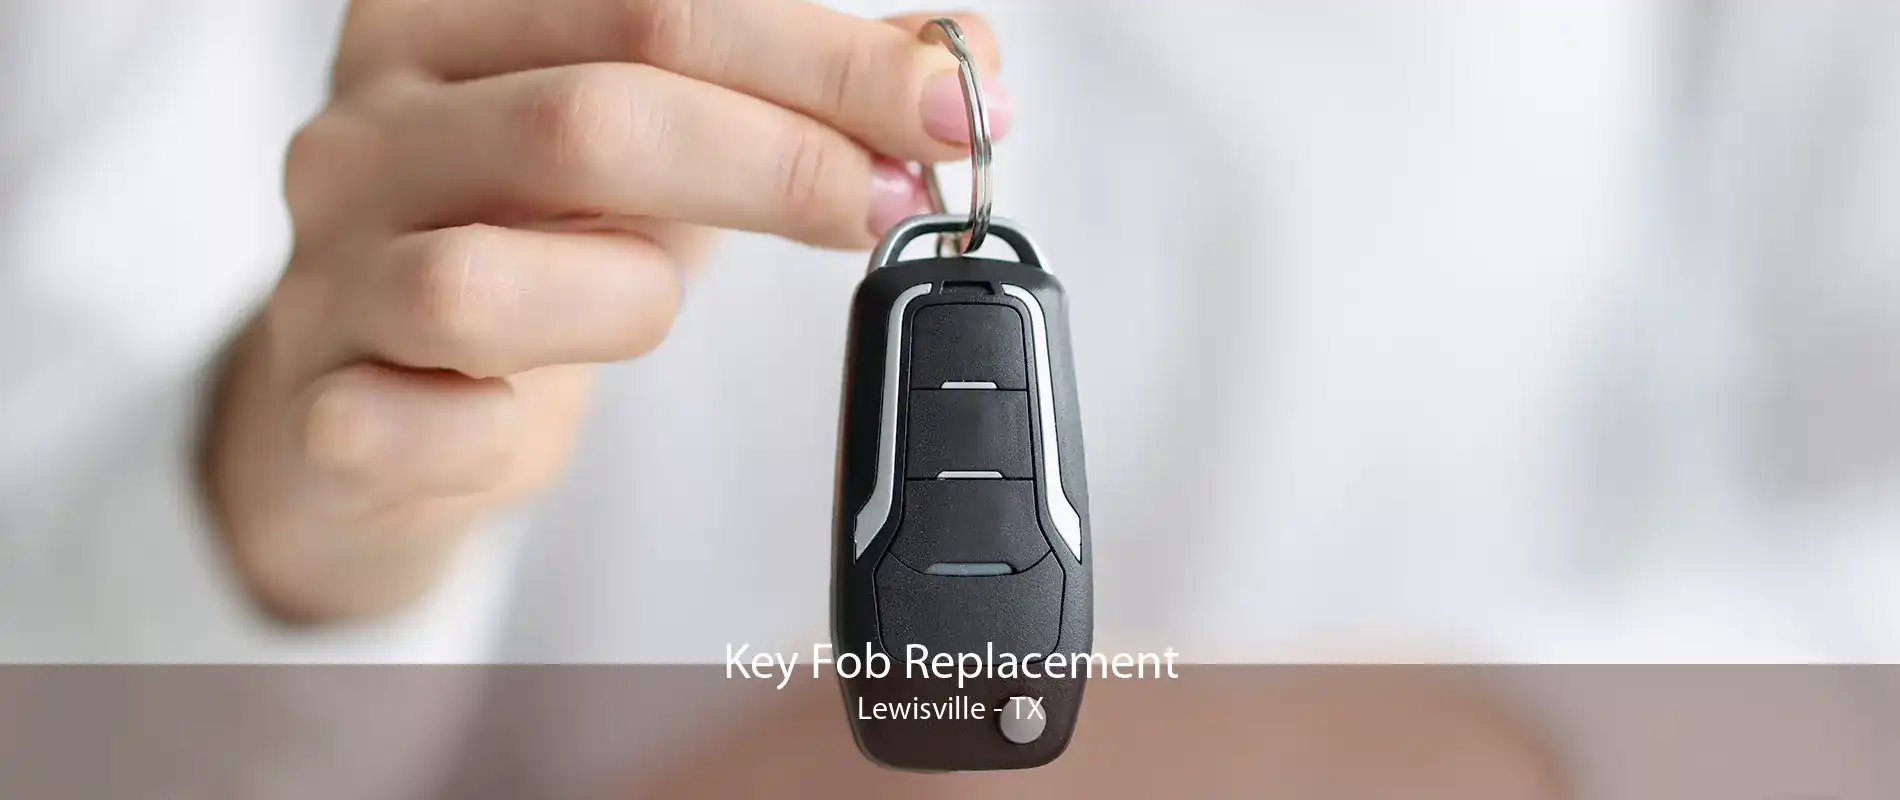 Key Fob Replacement Lewisville - TX